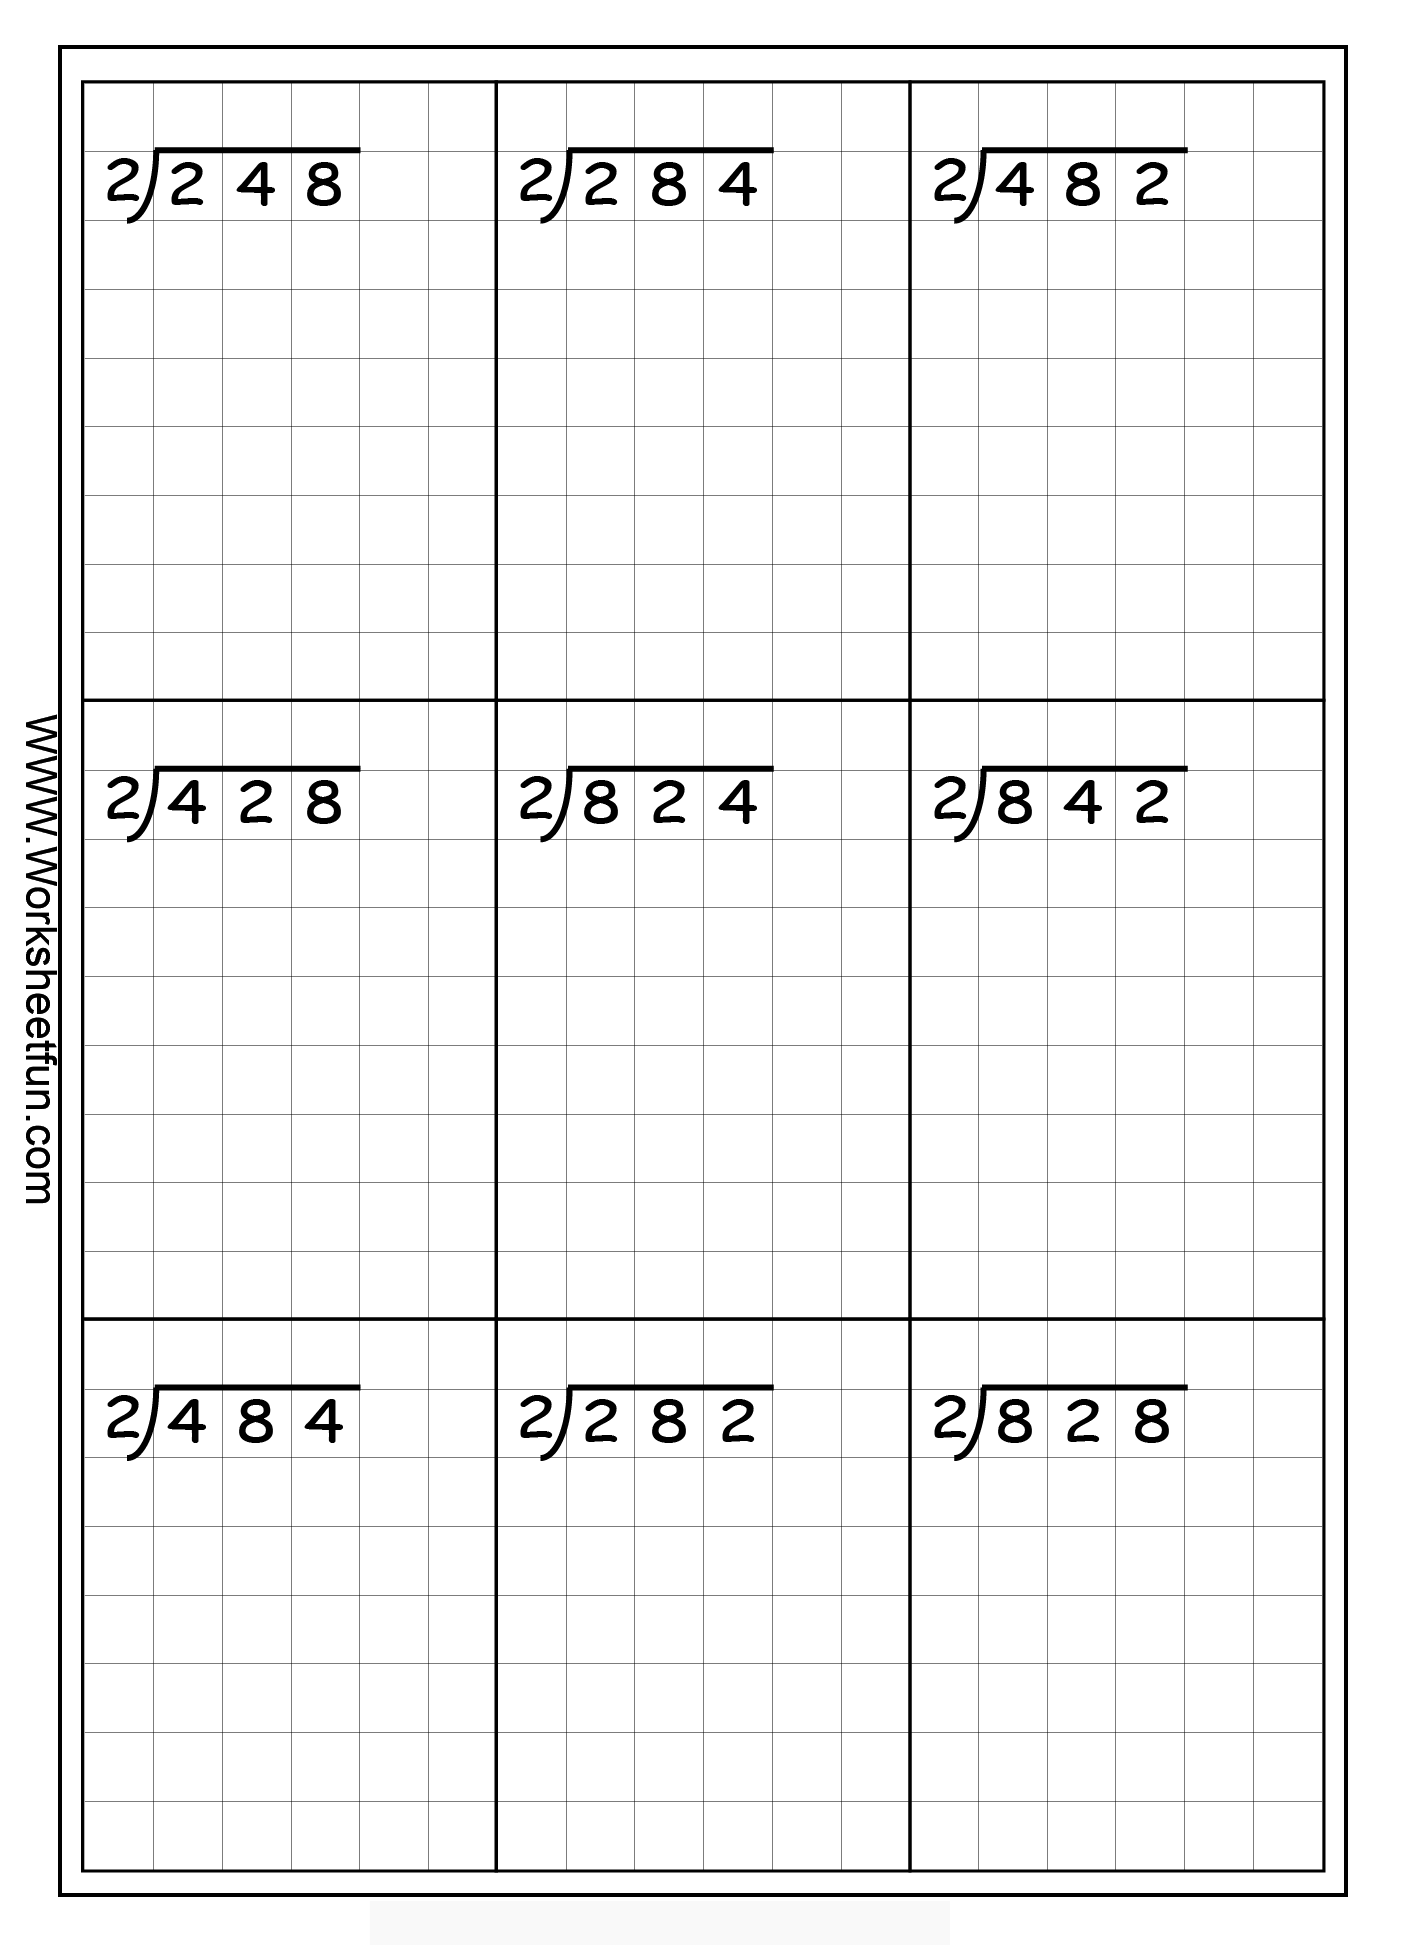 Long Division Worksheets 1 by 3 Image